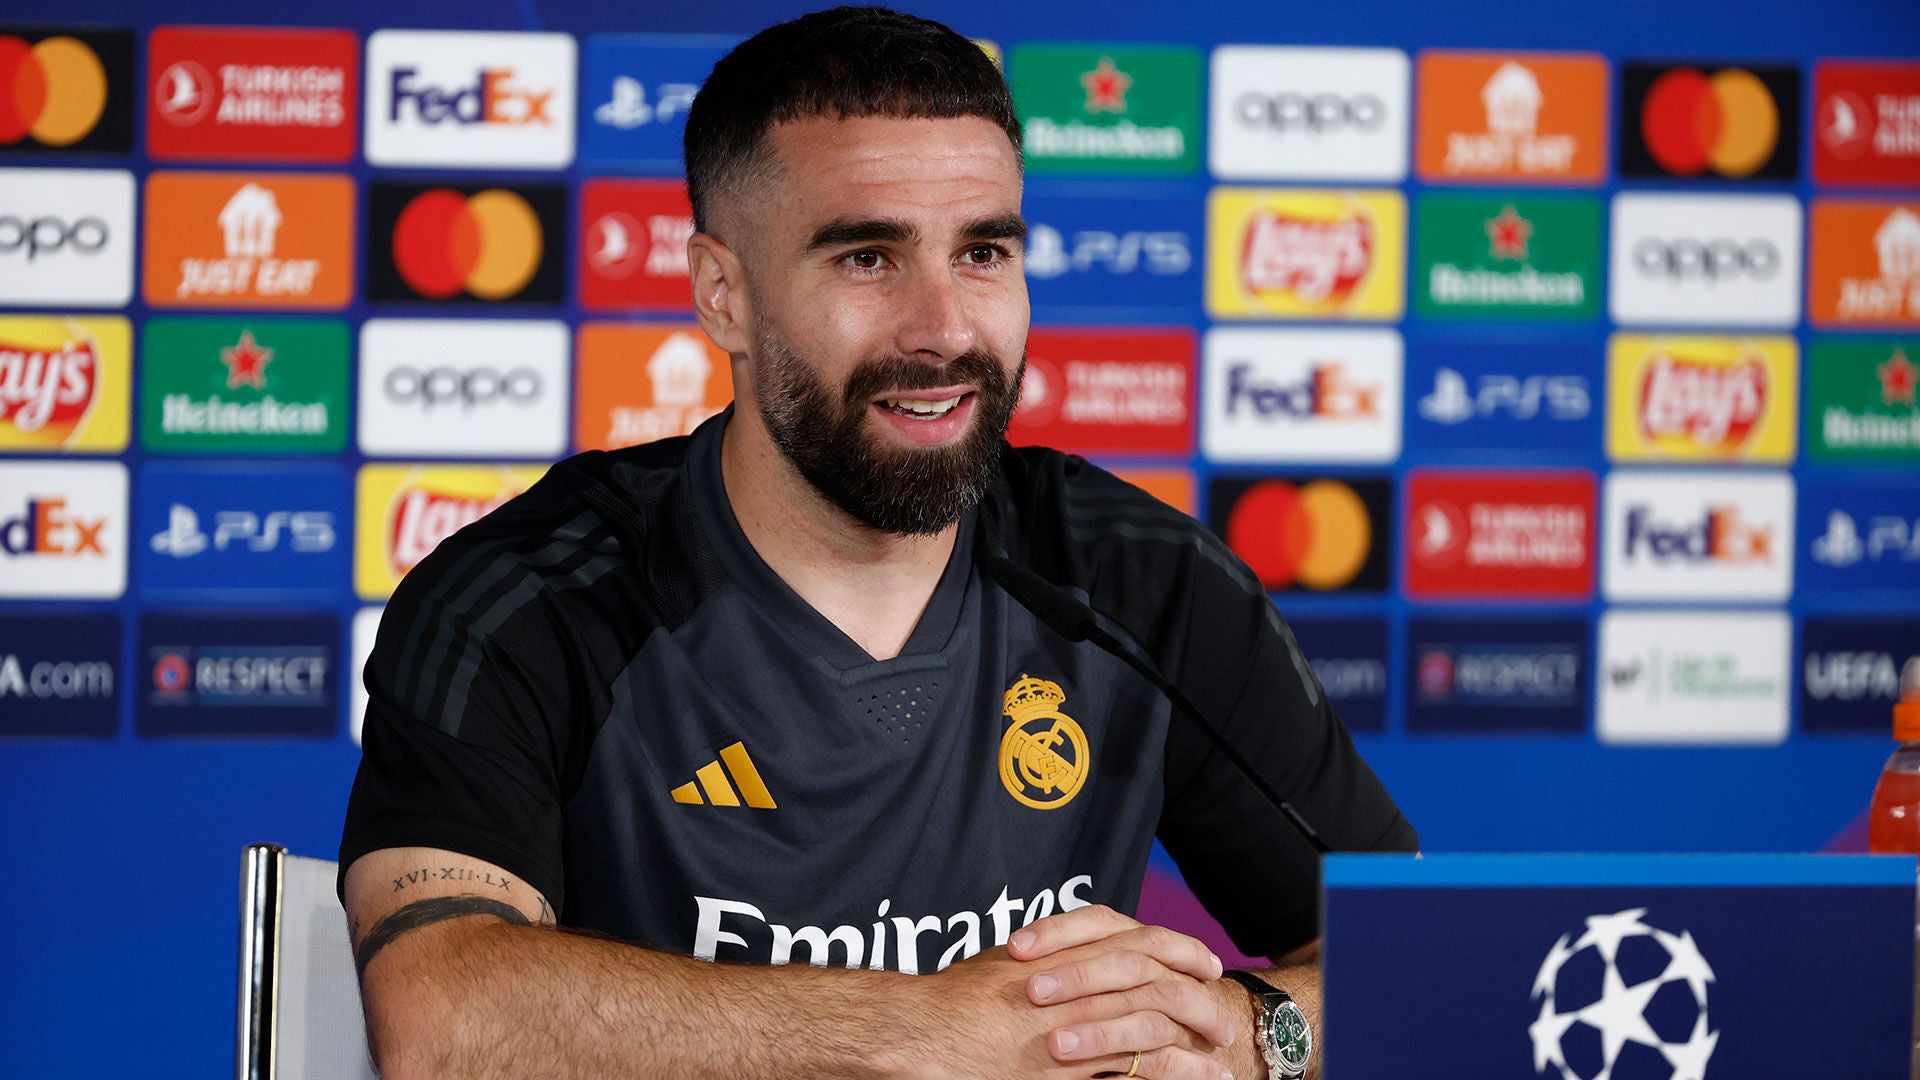 Carvajal: “We're having a great year and we want to make it to the final in London”